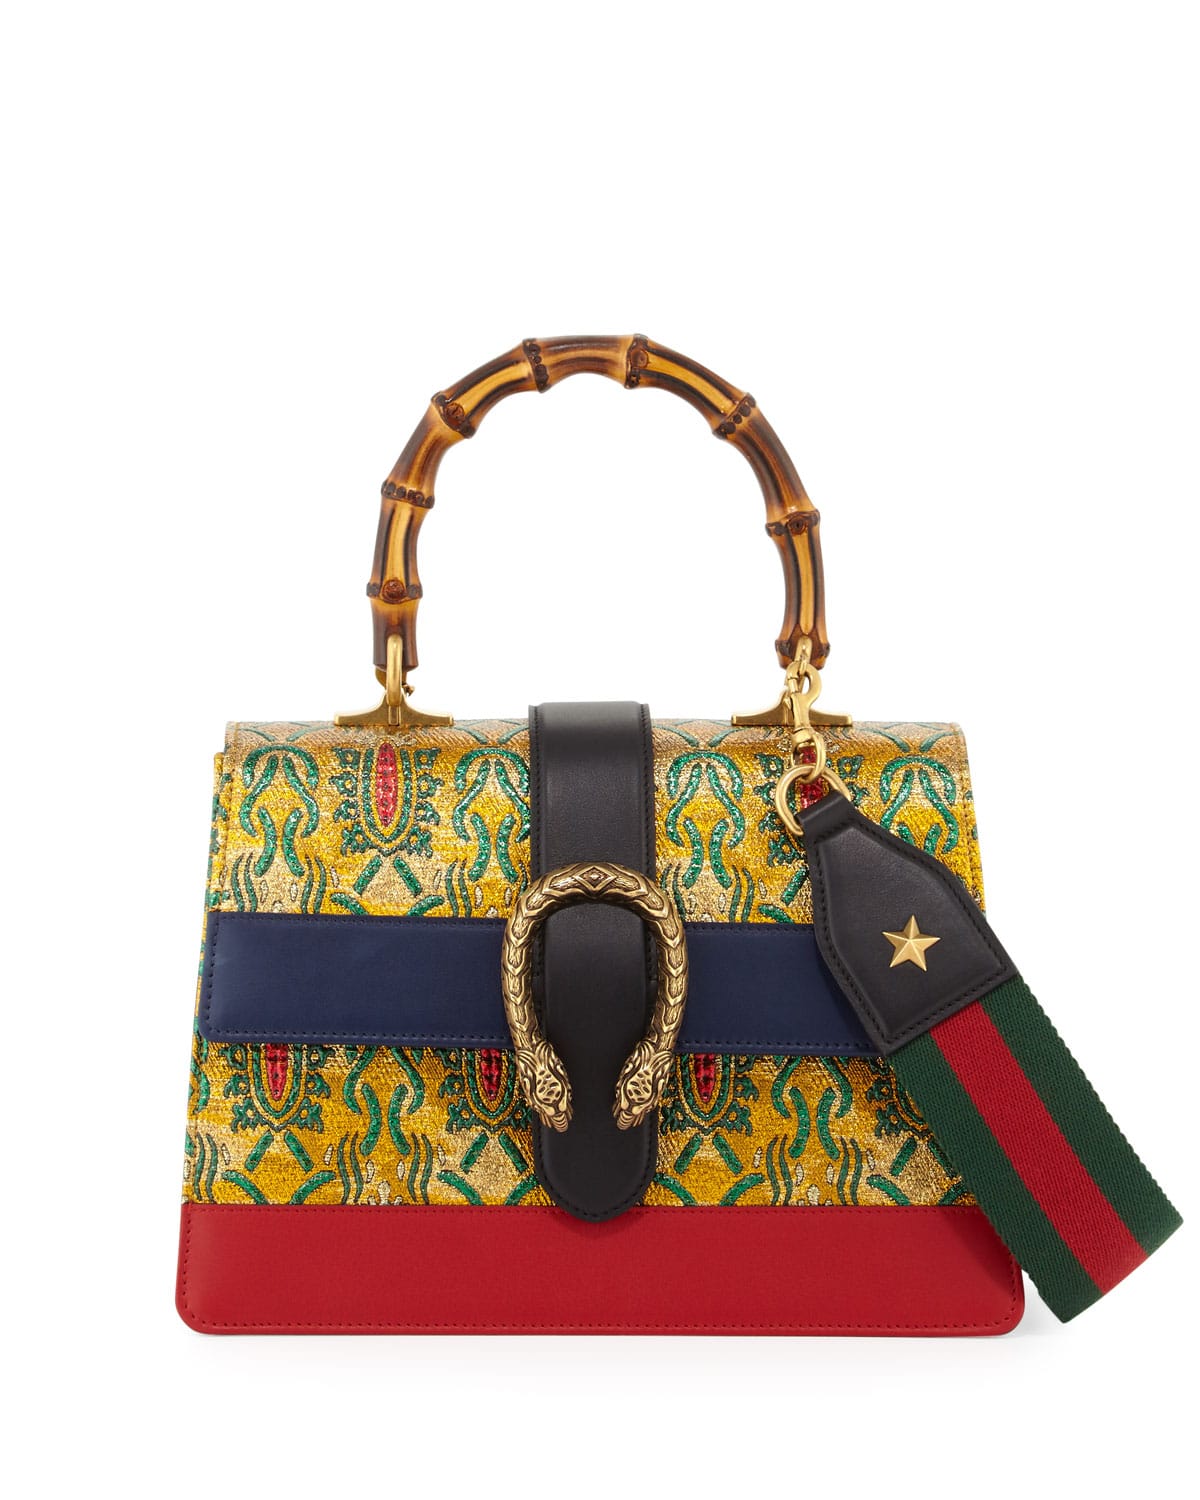 Gucci Spring/Summer 2017 Bag Collection - Spotted Fashion